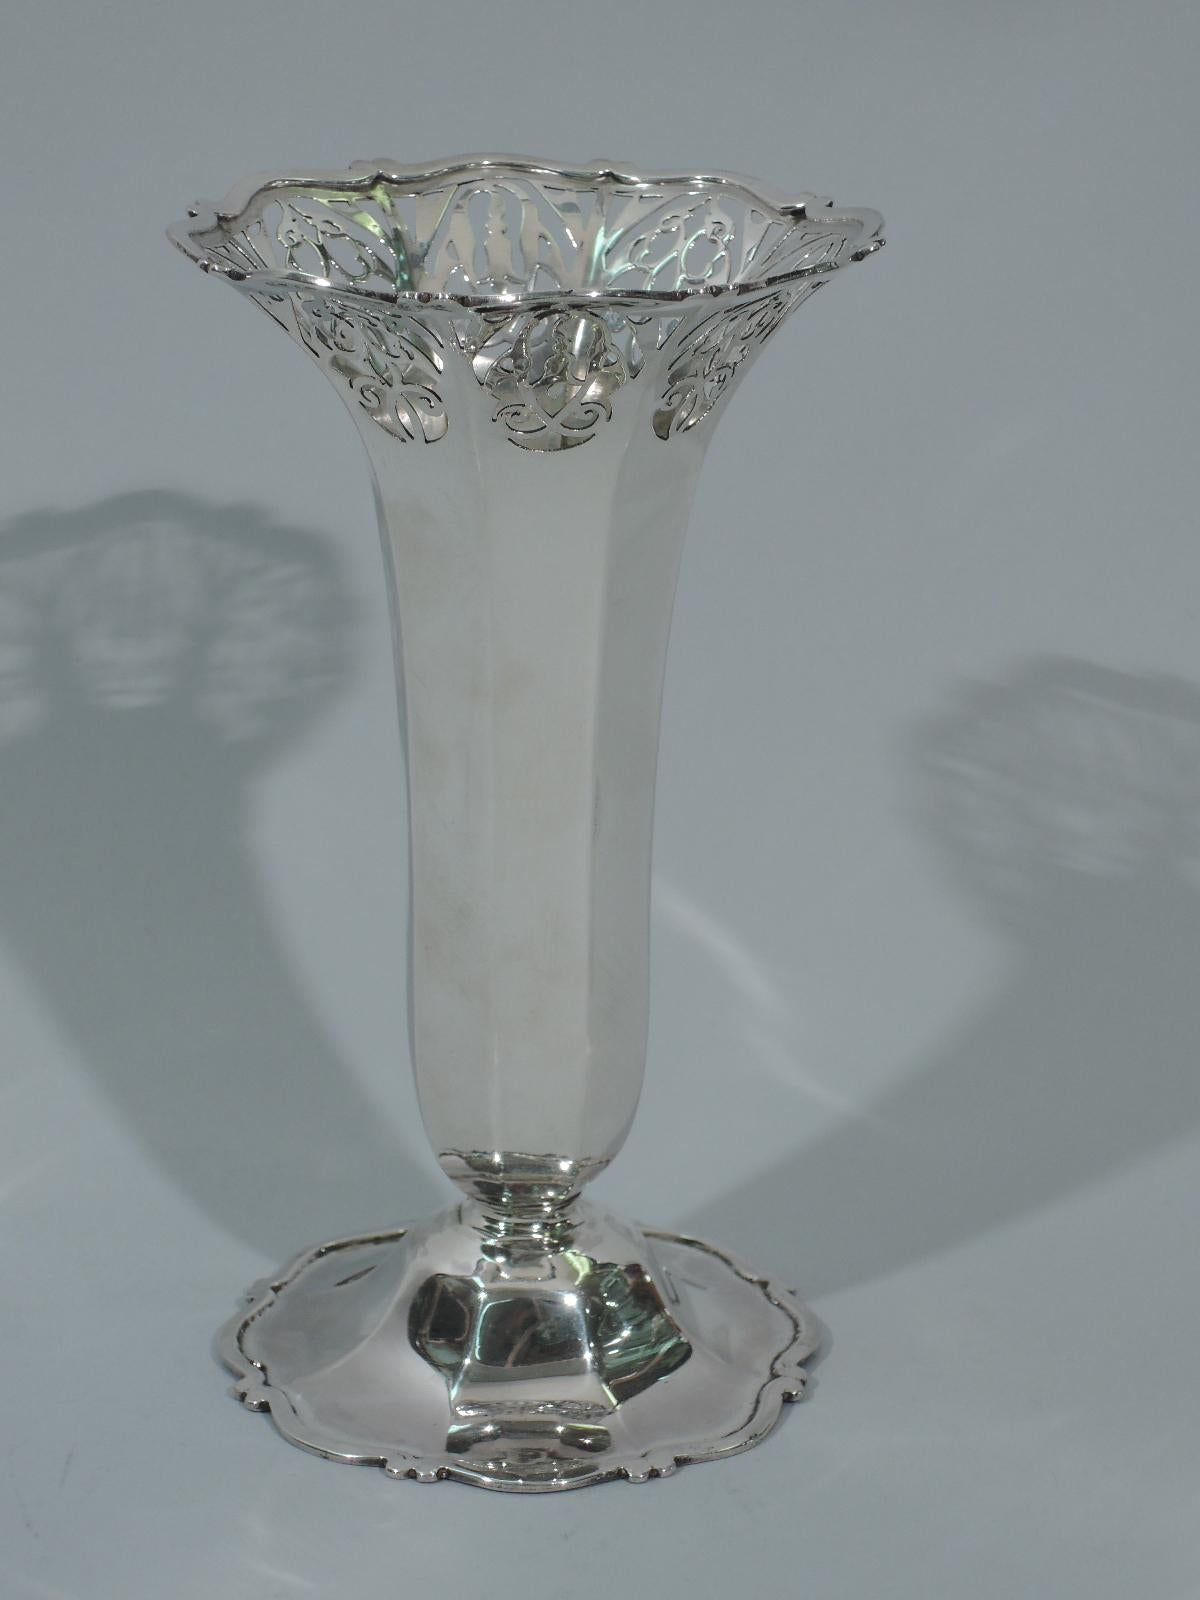 Victorian sterling silver vase. Made by Charles Clement Pilling–Sibray Hall & Co. in London in 1901. Faceted body on raised and faceted foot. Scrolls applied to rim and foot rim. Pierced scrolls and flowers. Hallmarked. Design number 354771